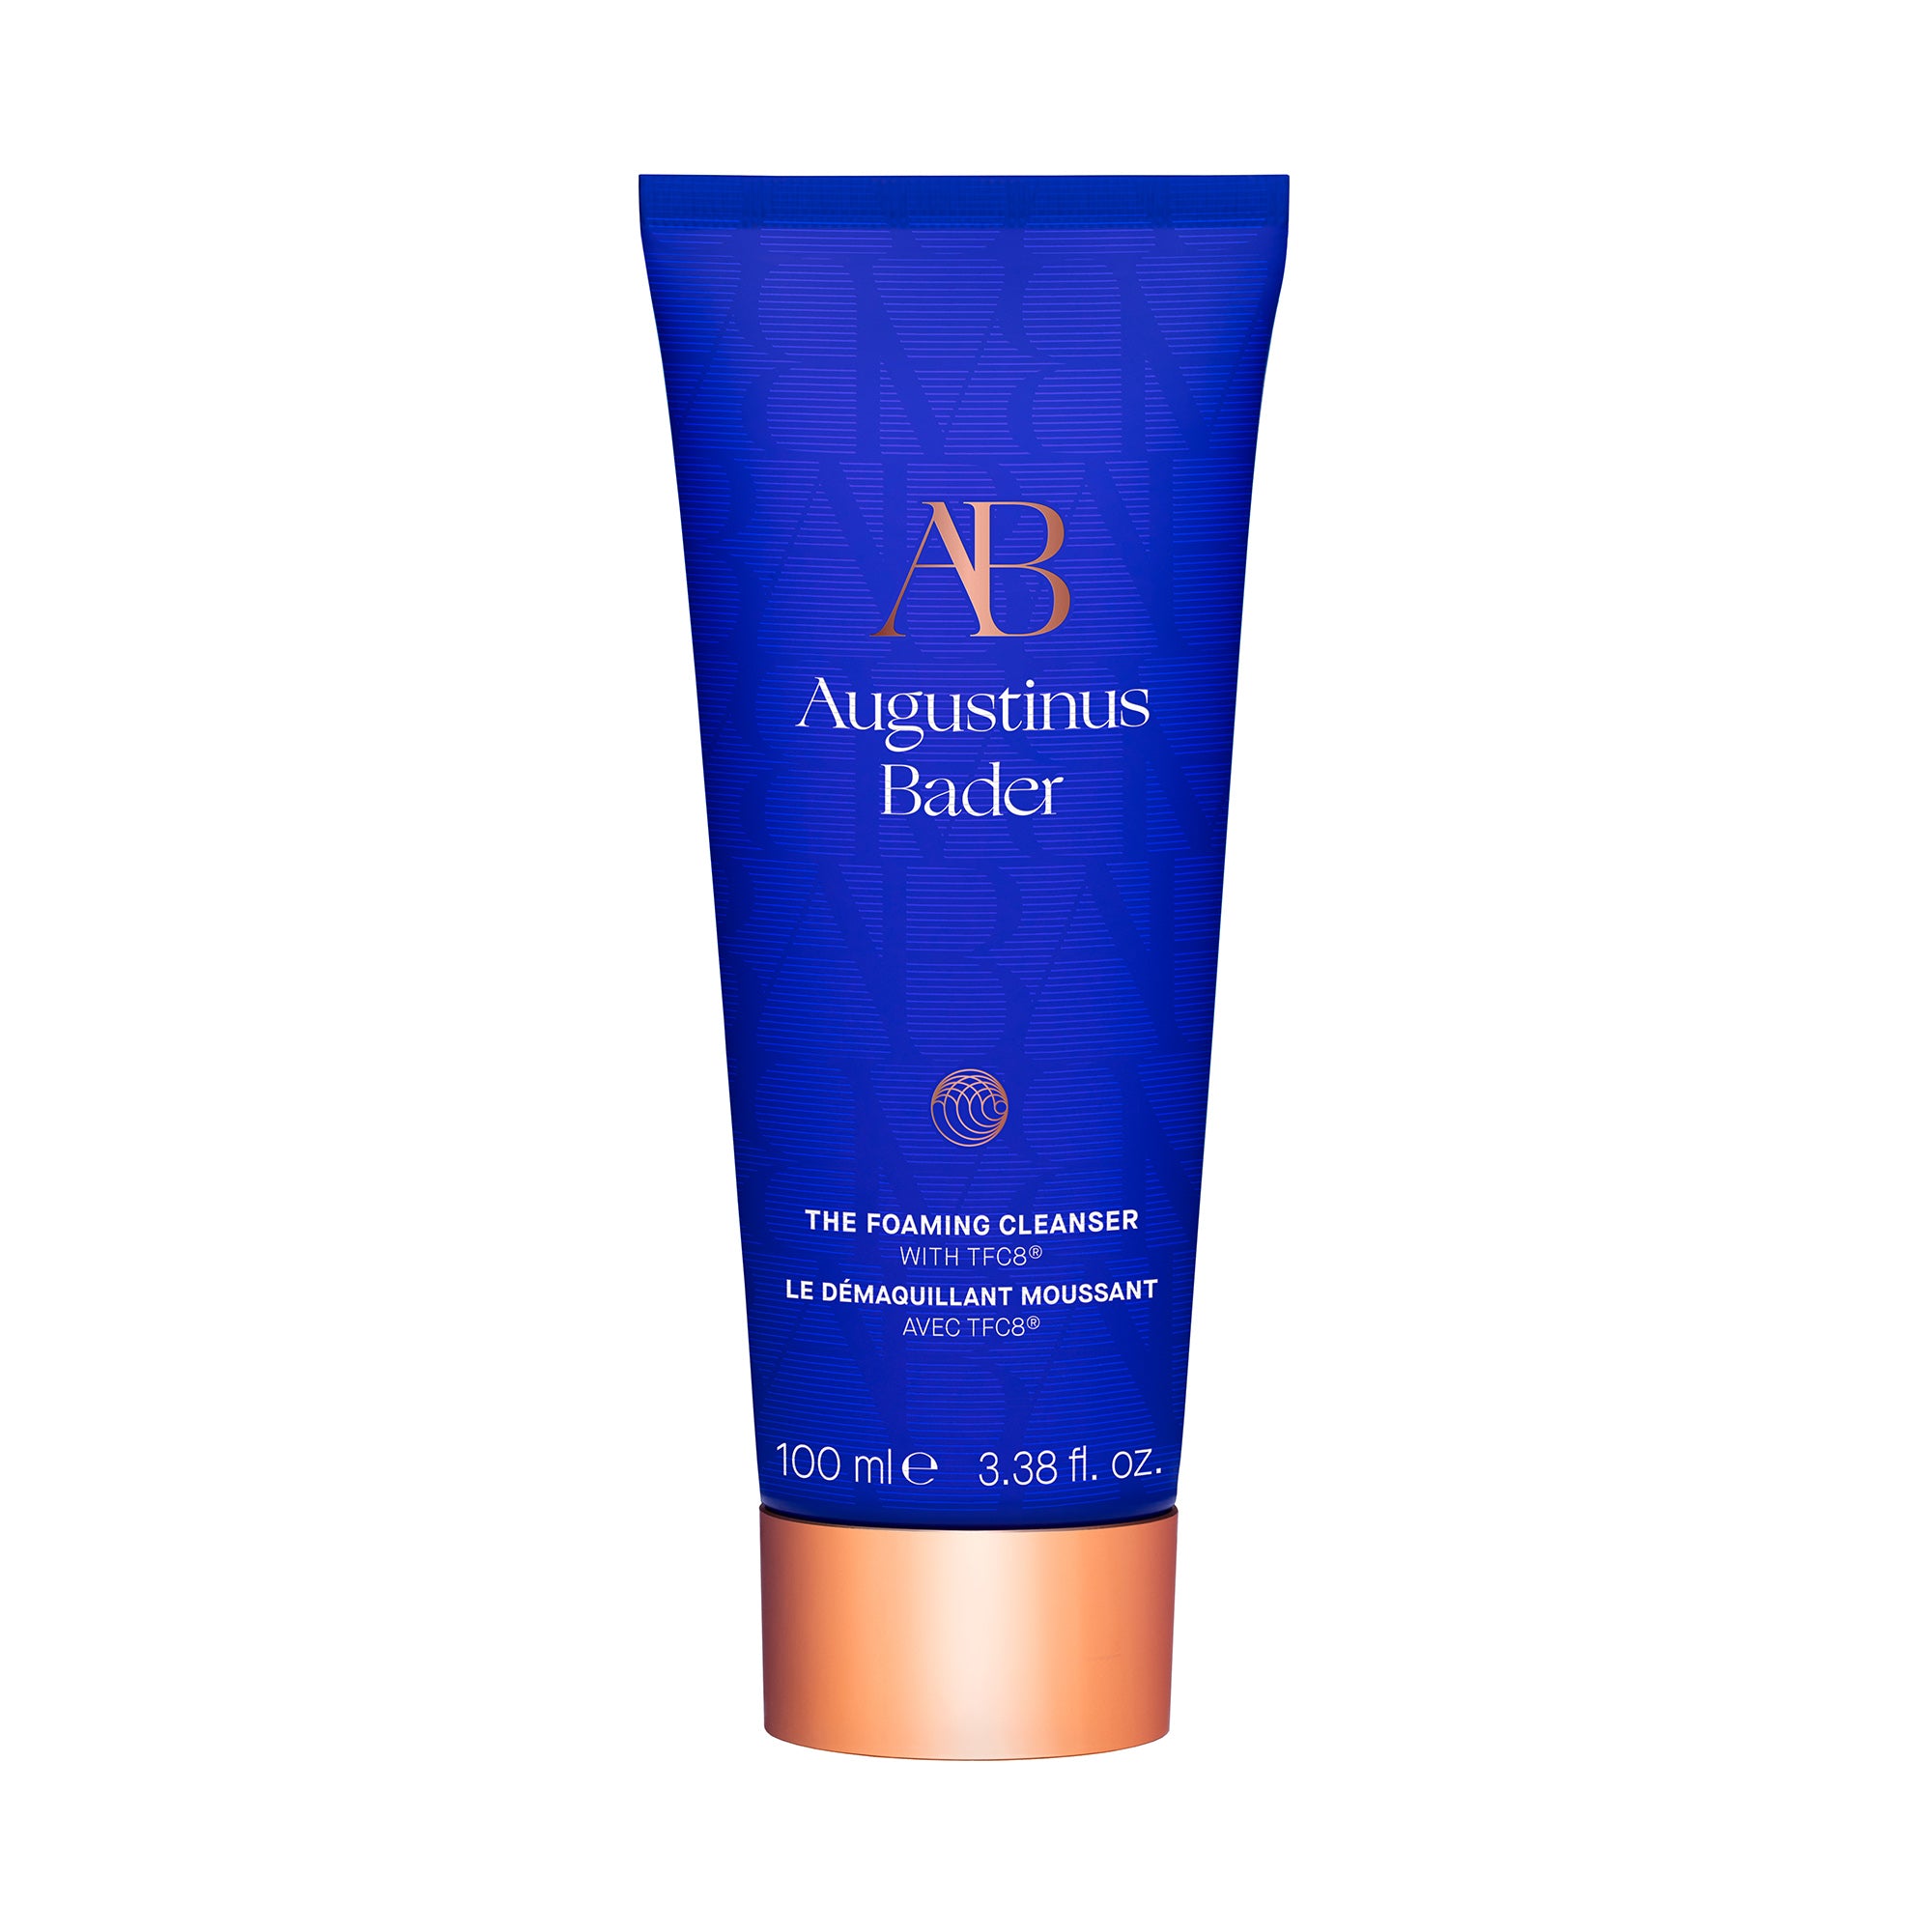 Augustinus Bader - The Foaming Cleanser 100mL